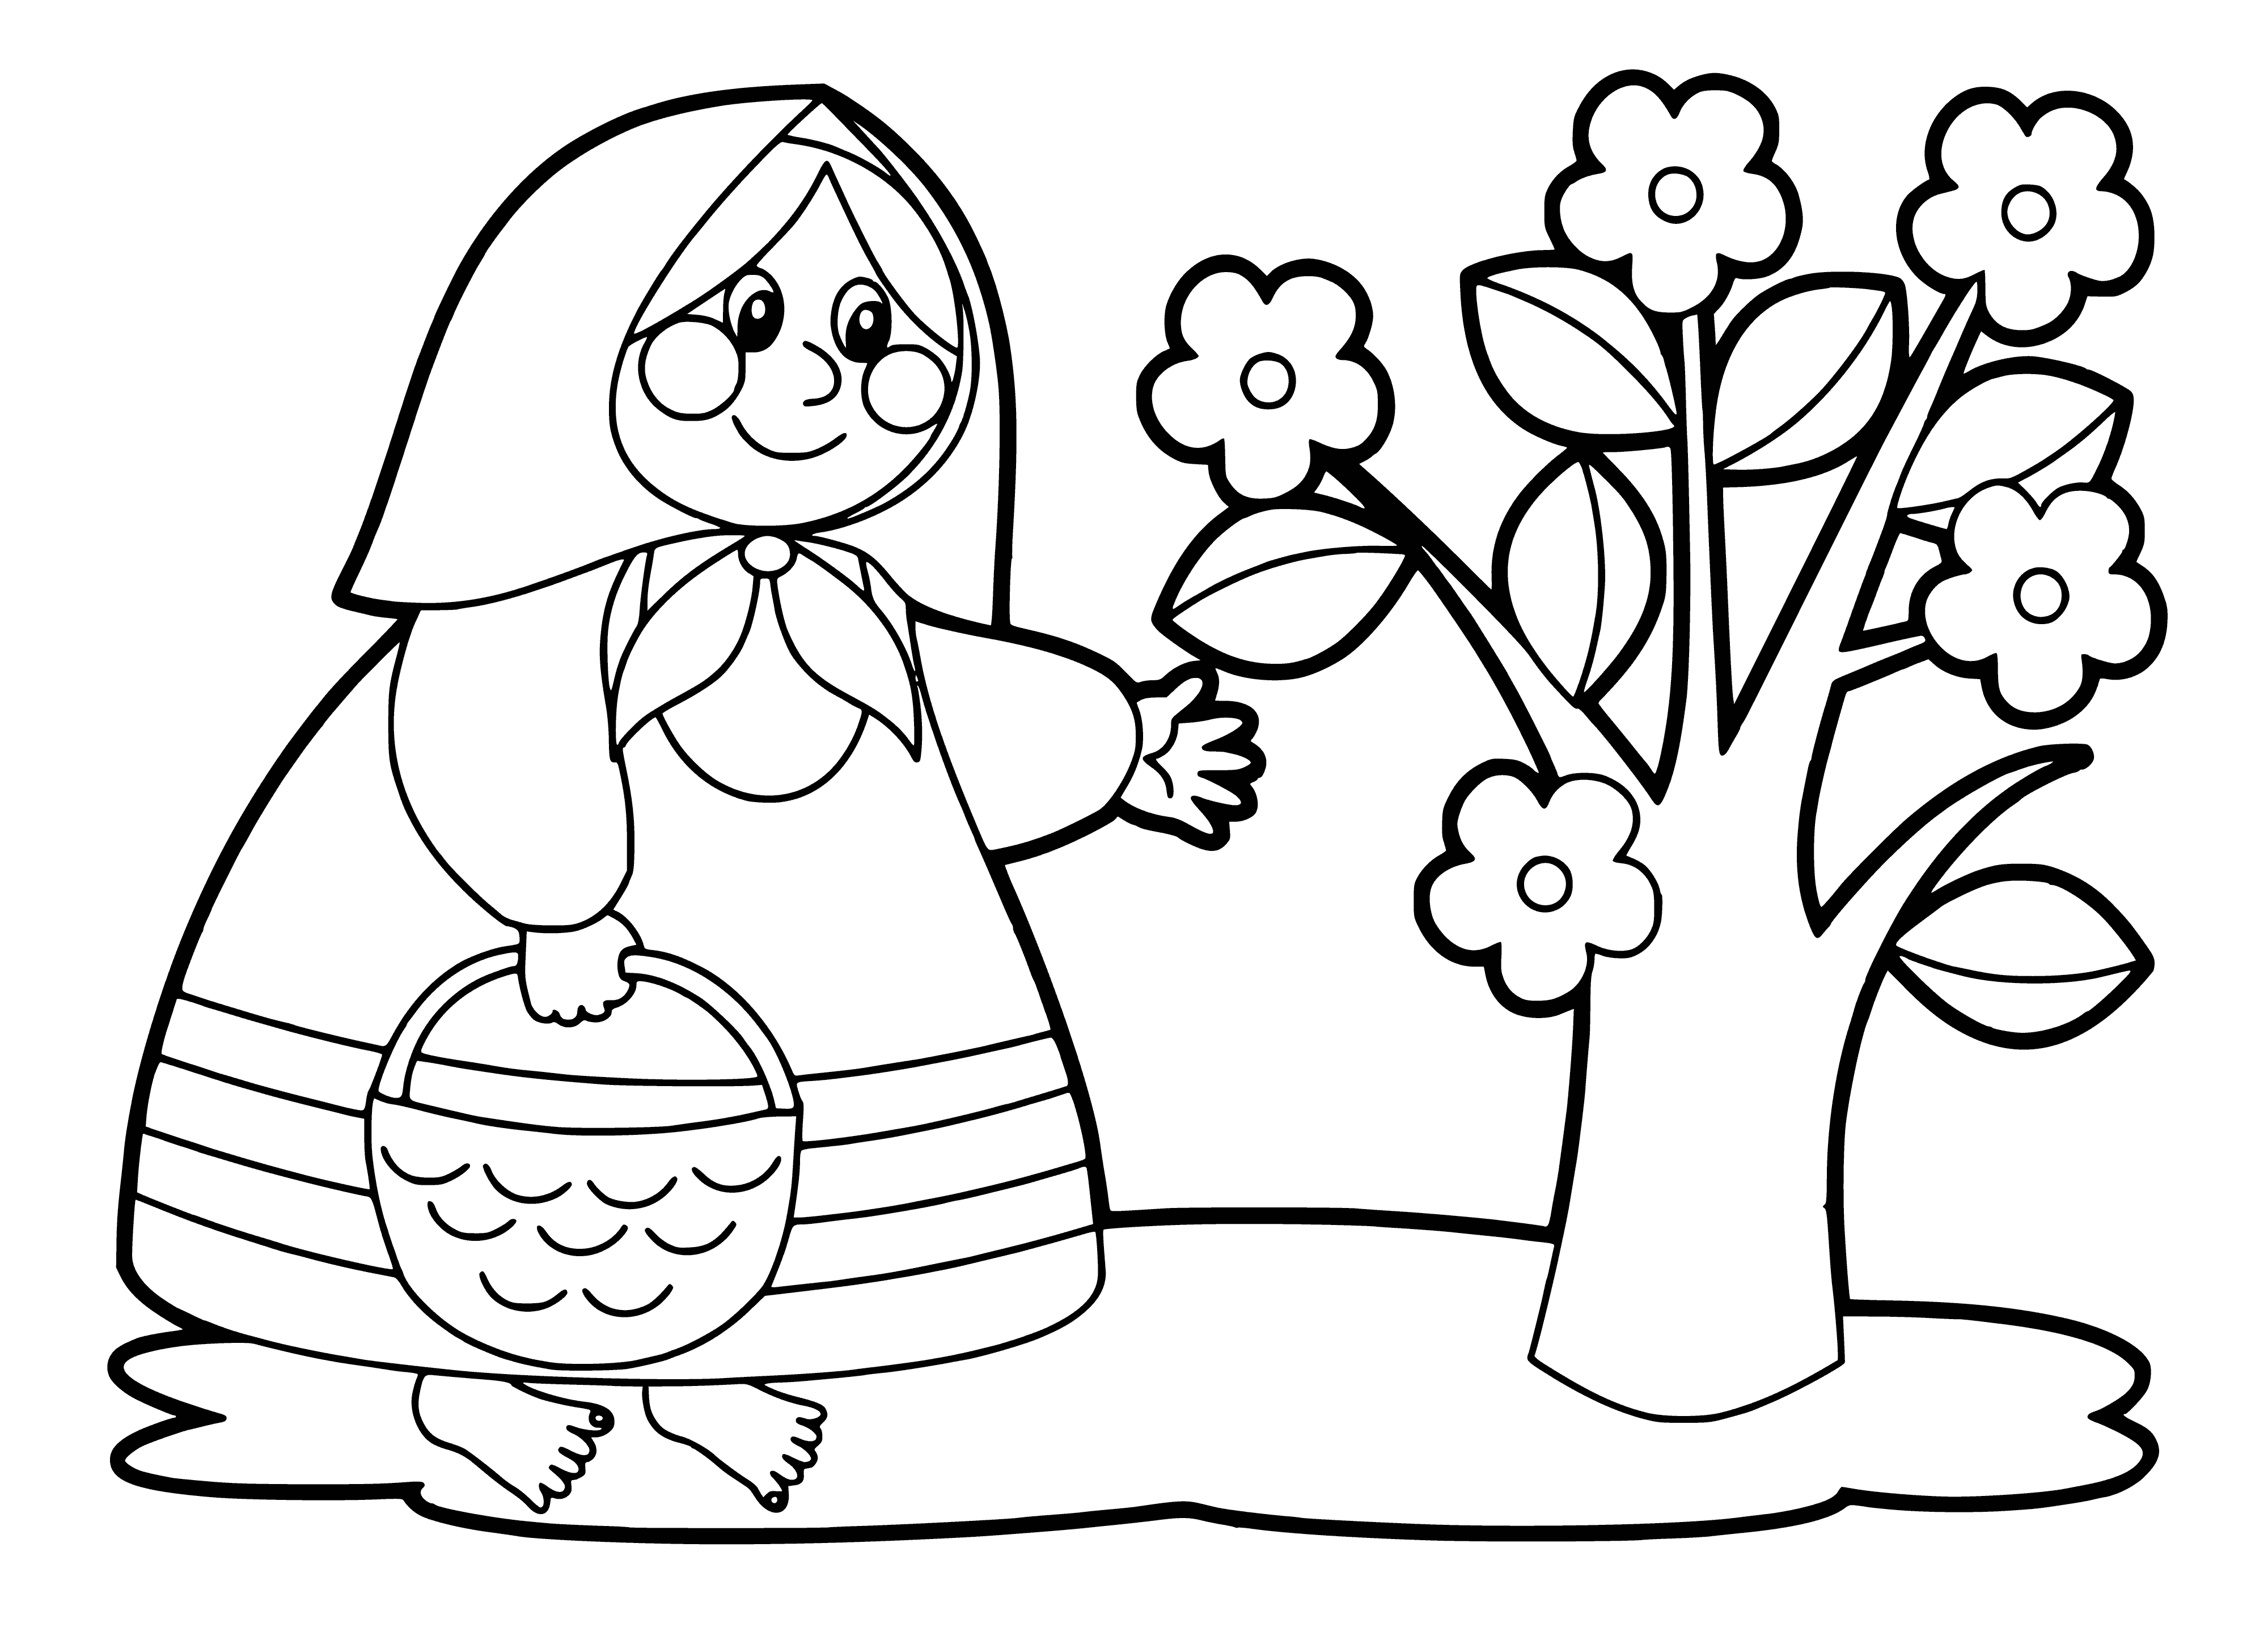 coloring page: Coloring page of Granny cooking in kitchen w/ a blue dress & white apron; a black & white cat is on floor. For 3-4 year olds.